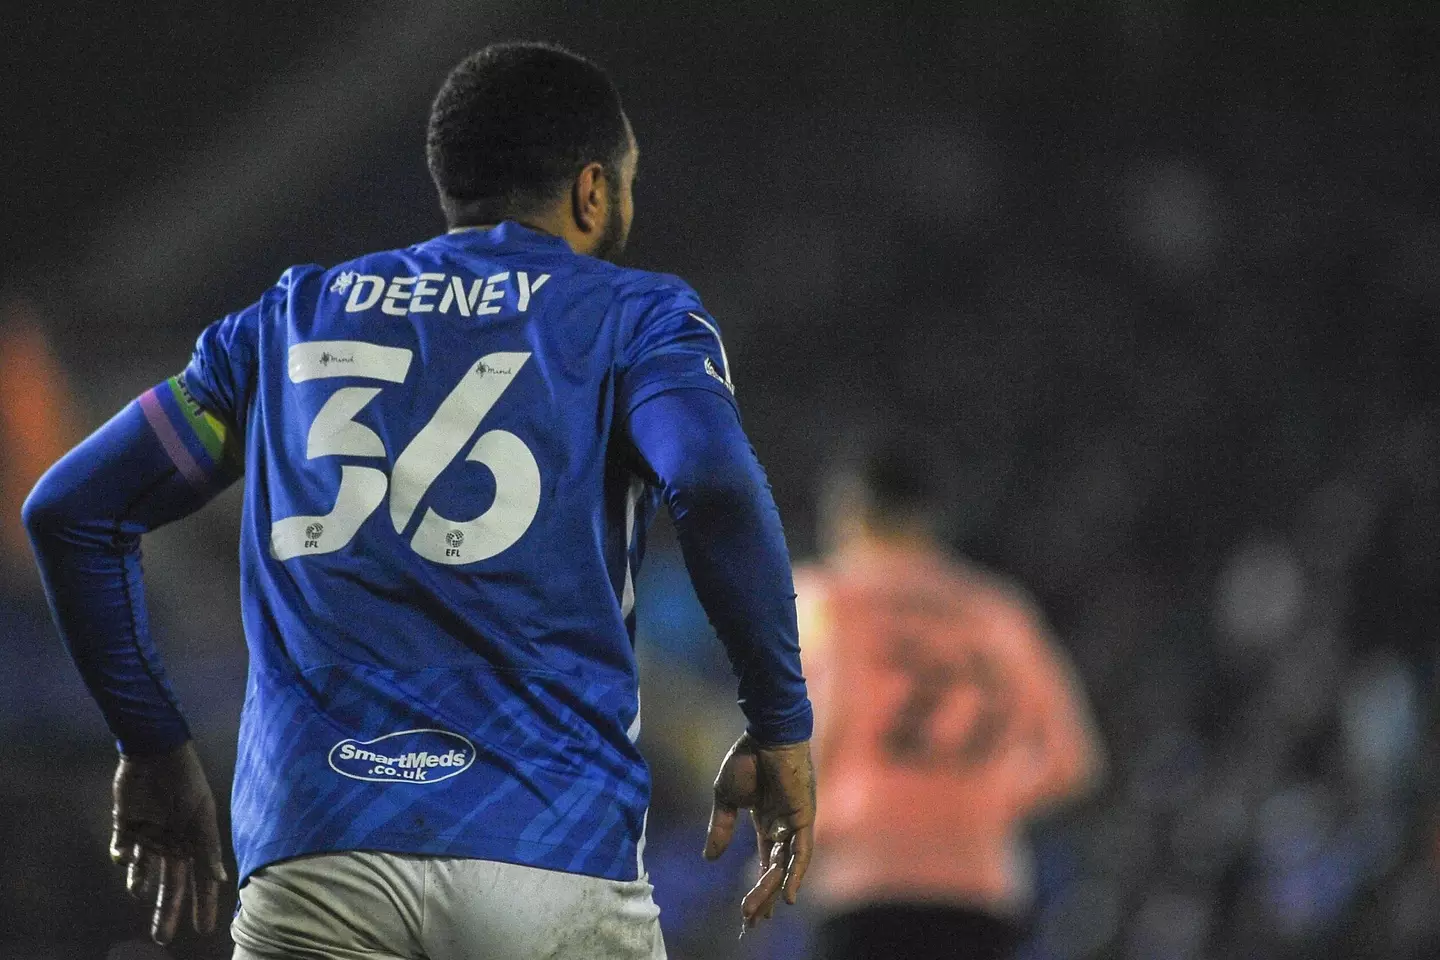 Troy Deeney (Birmingham no. 36 ) during the Sky Bet Championship match between Birmingham City and Cardiff City at St Andrews, Birmingham, England.